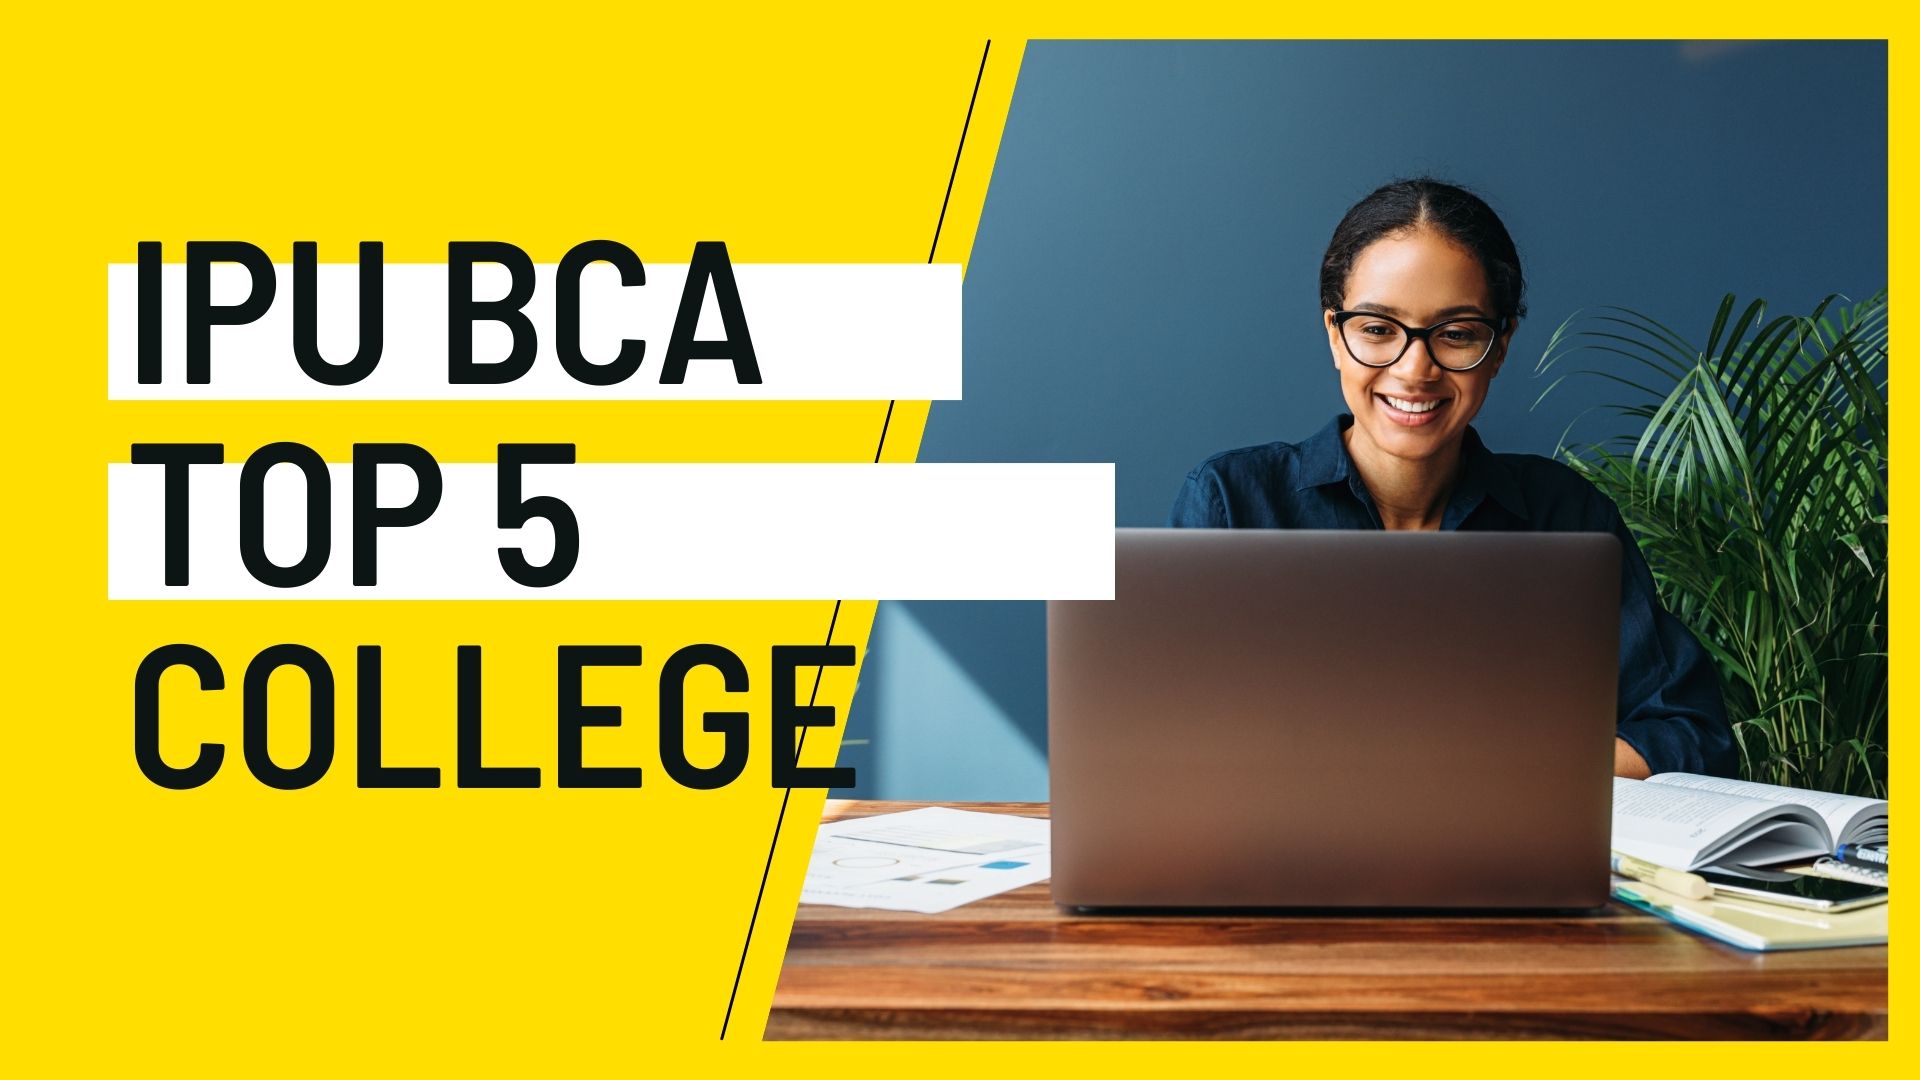 Top 5 Colleges for IPU BCA Admission CET Code-114:- Eligibility Criteria, Admission Criteria, Syllabus, Counselling Process